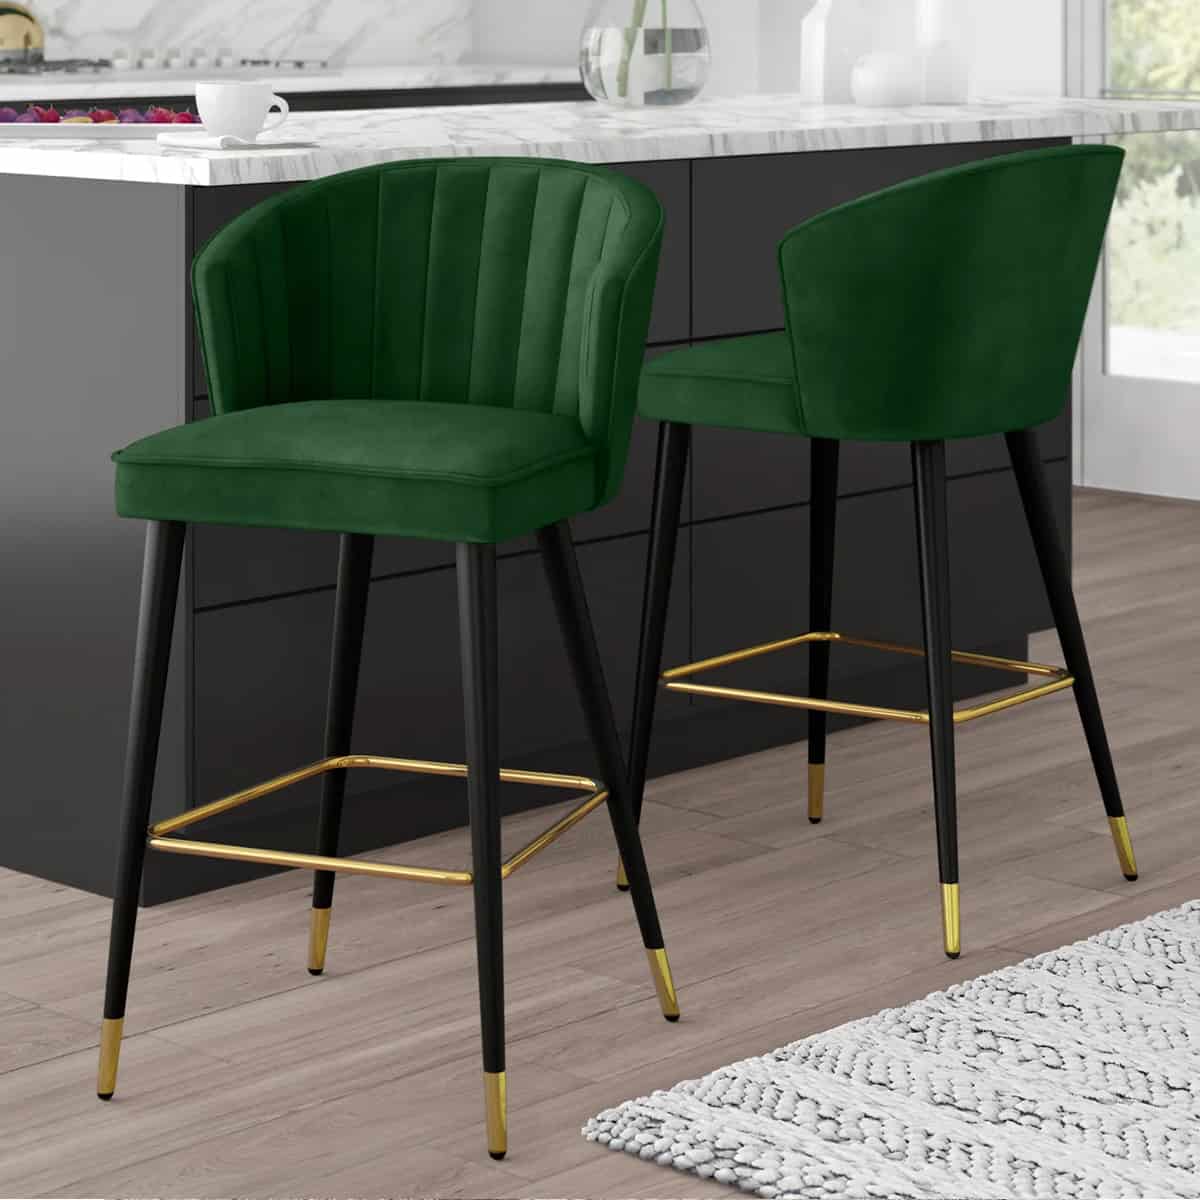 Green mid century bar stools with plush cushions with a back.